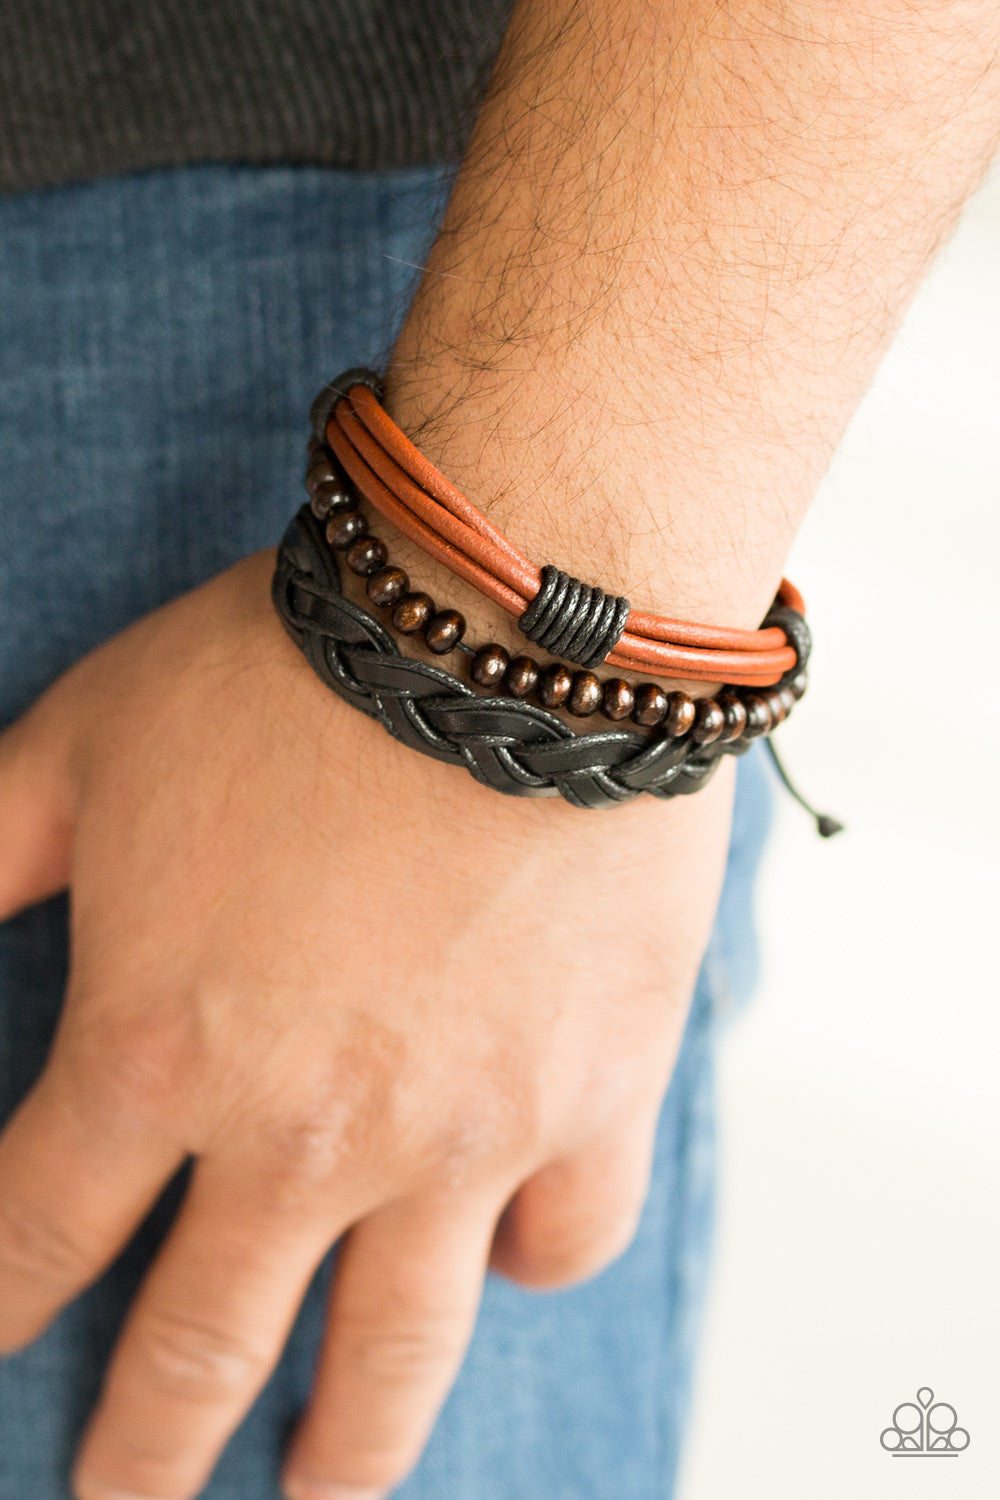 A mishmash of black braided twine and leather and strands of shiny brown leather cording layer across the wrist. A strand of wooden beads is added to the urban palette for an earthy finish. Features an adjustable sliding knot closure. Sold as one individual bracelet.